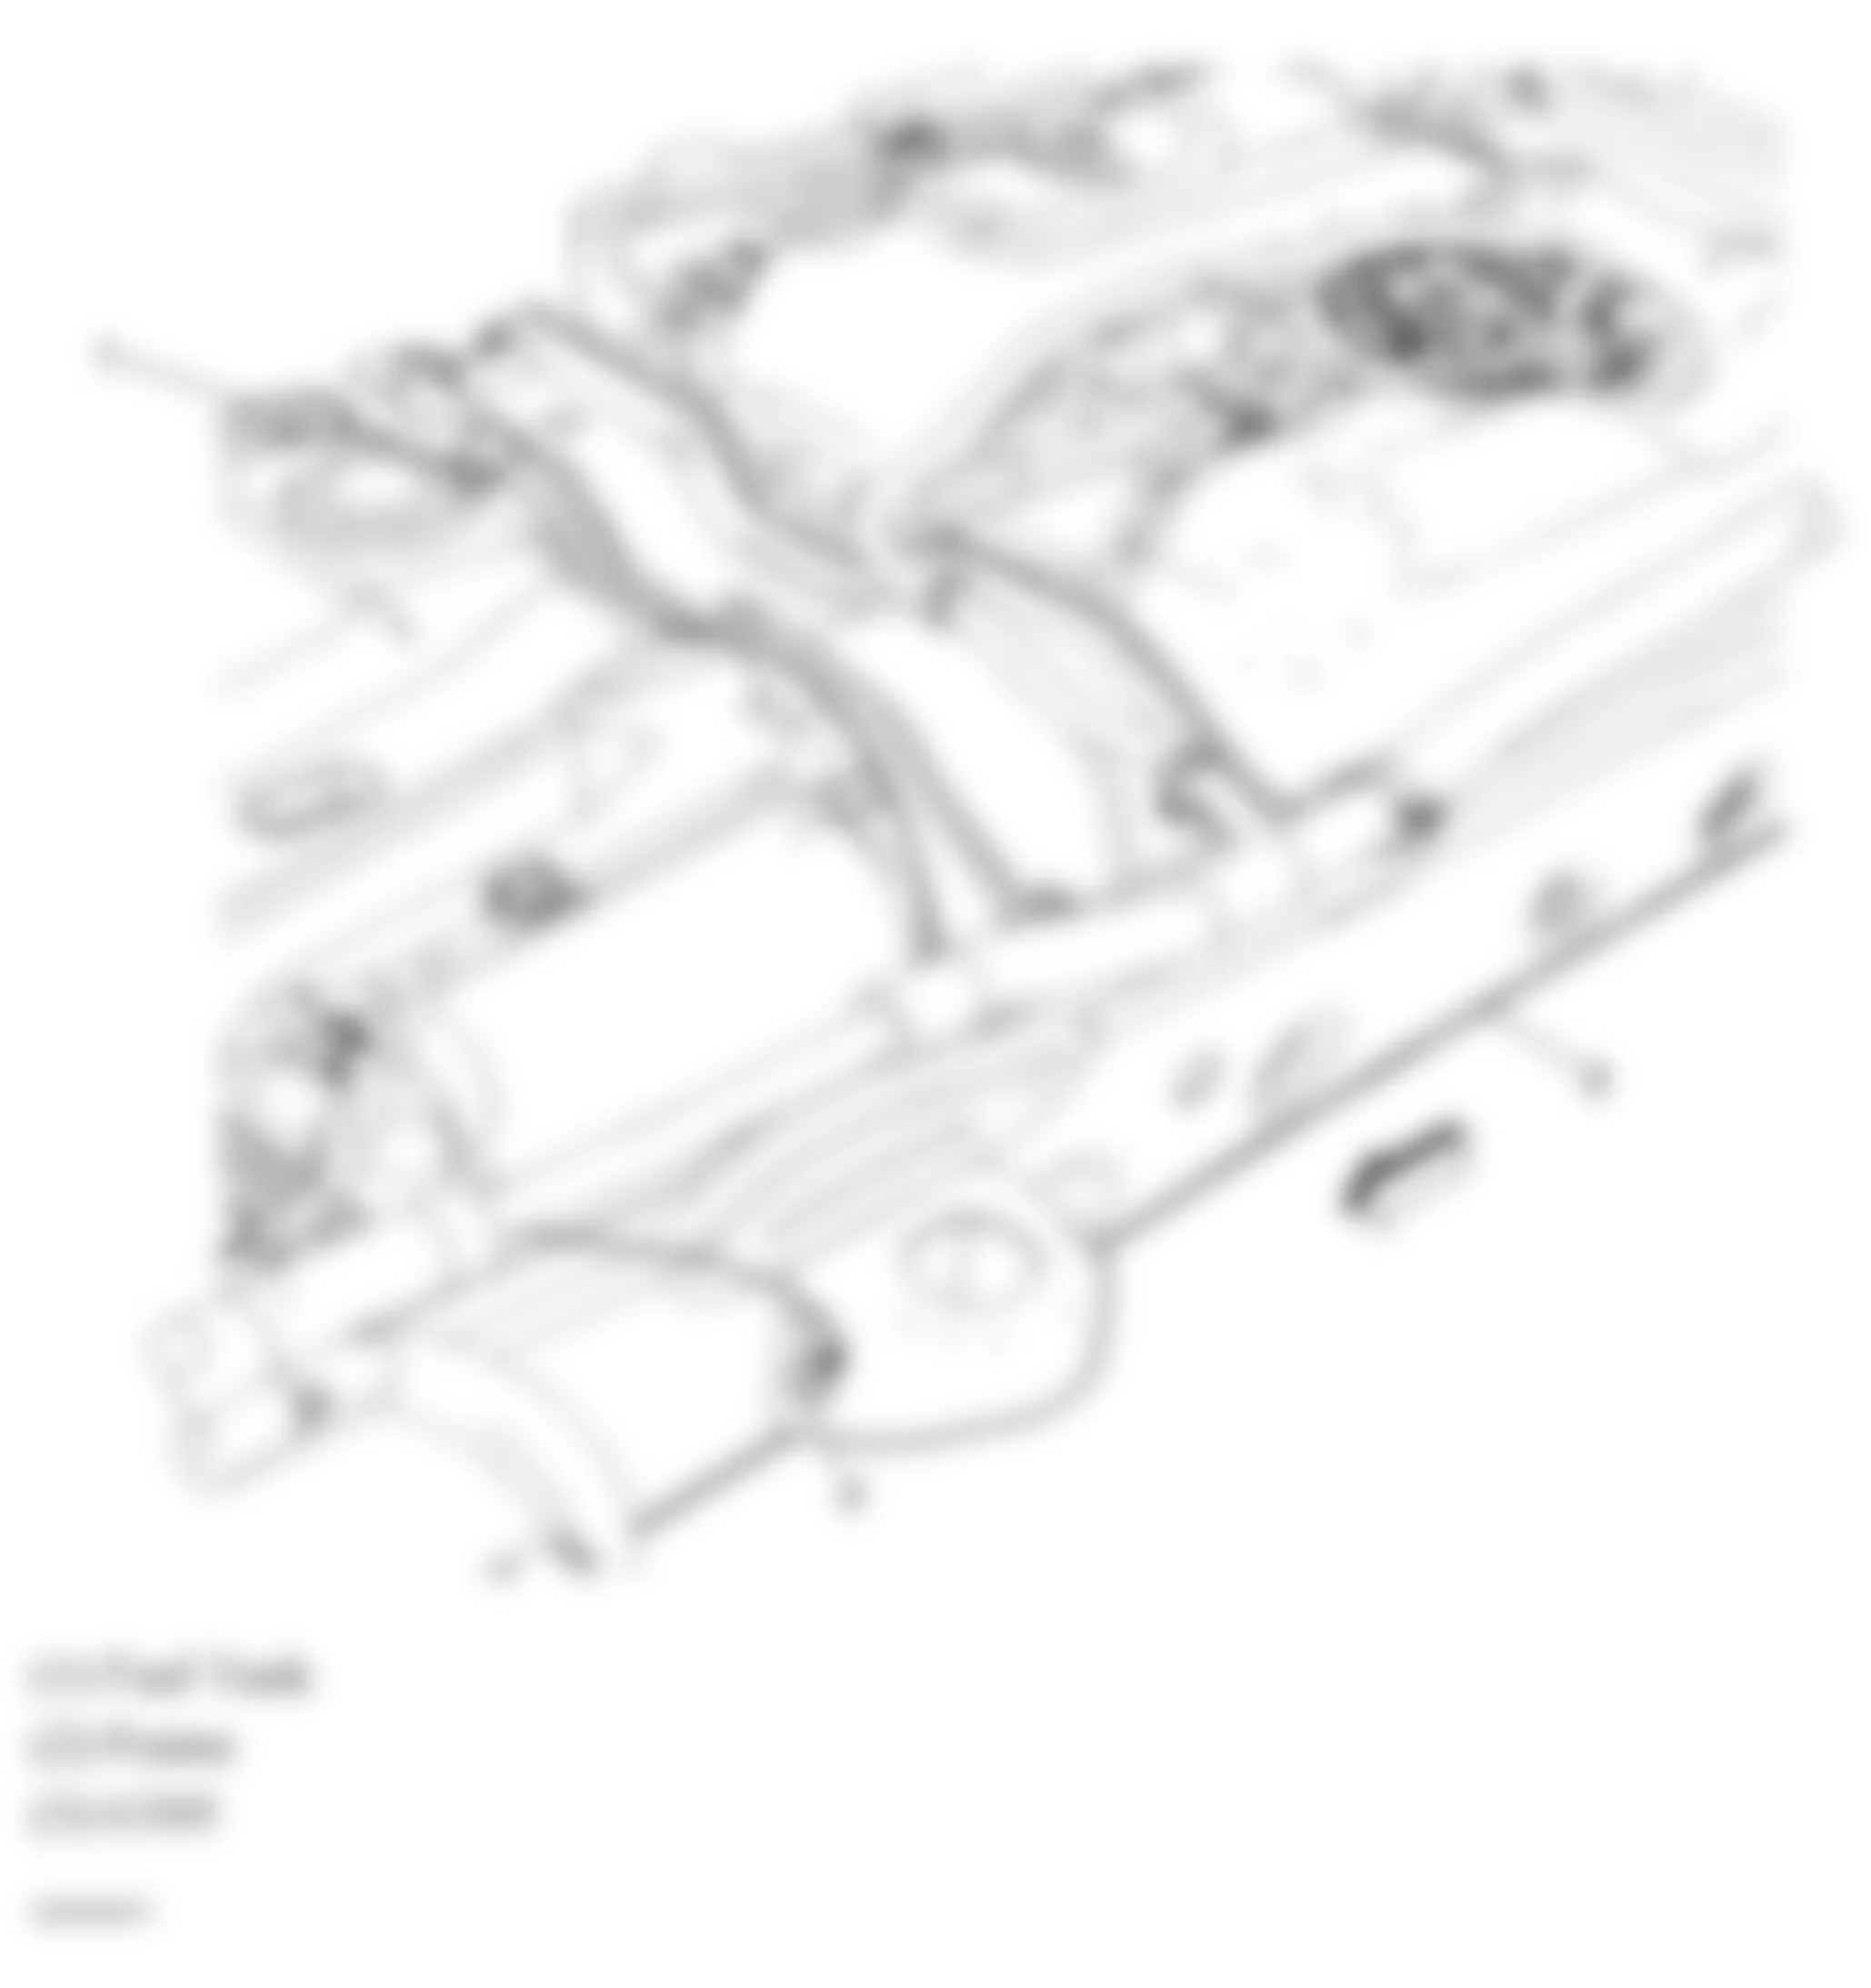 Chevrolet Suburban C2500 2008 - Component Locations -  Rear Chassis